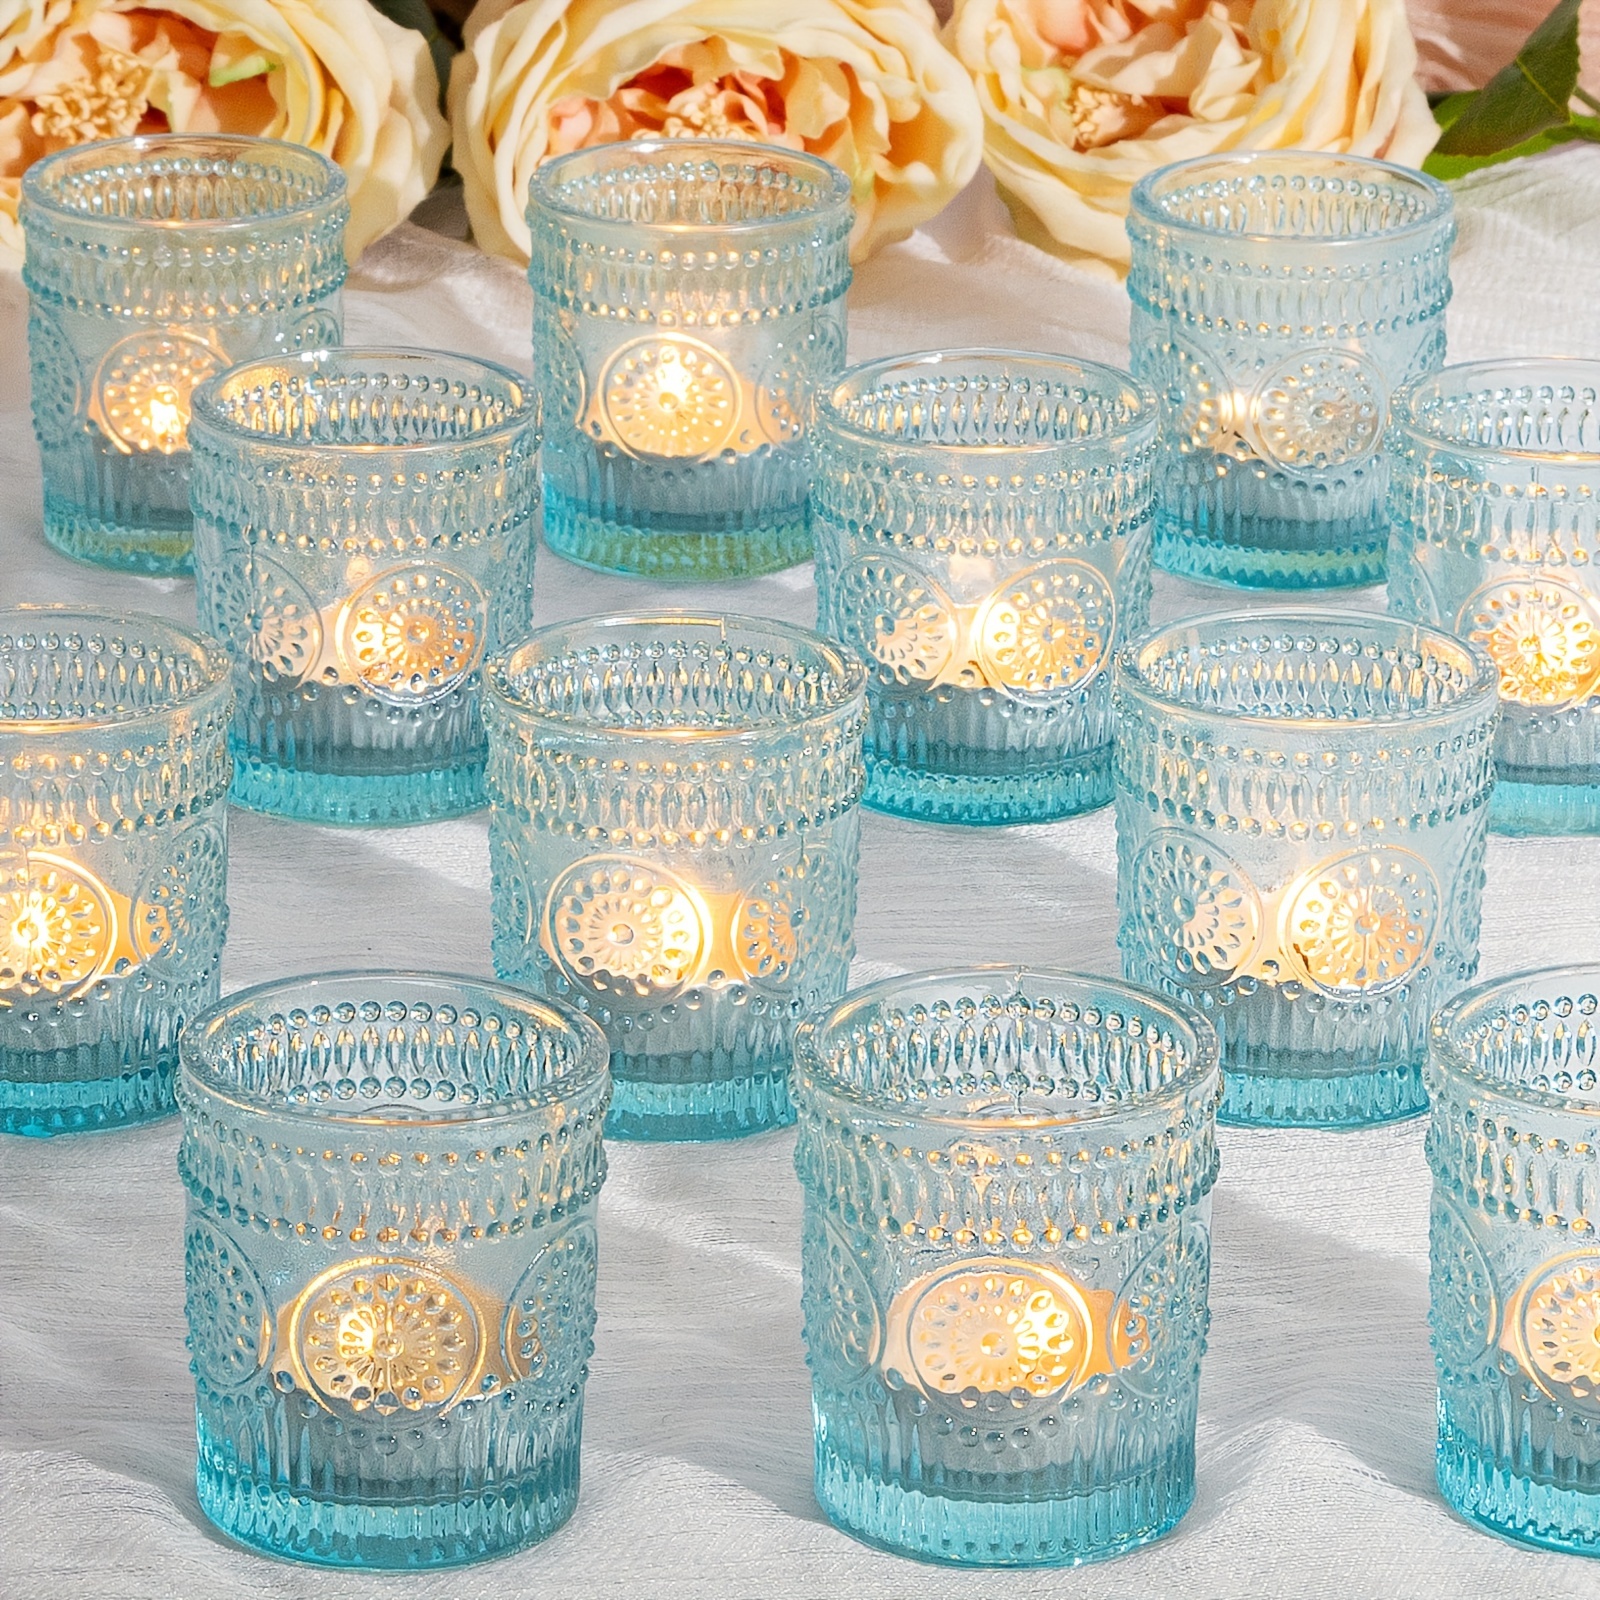 

24 Pcs Votive Candle Holders, Blue Glass Candle Holders Bulk For Table Centerpiece, Tea Lights Candle Holders For Wedding Shower, Party, Holiday & Home Decor